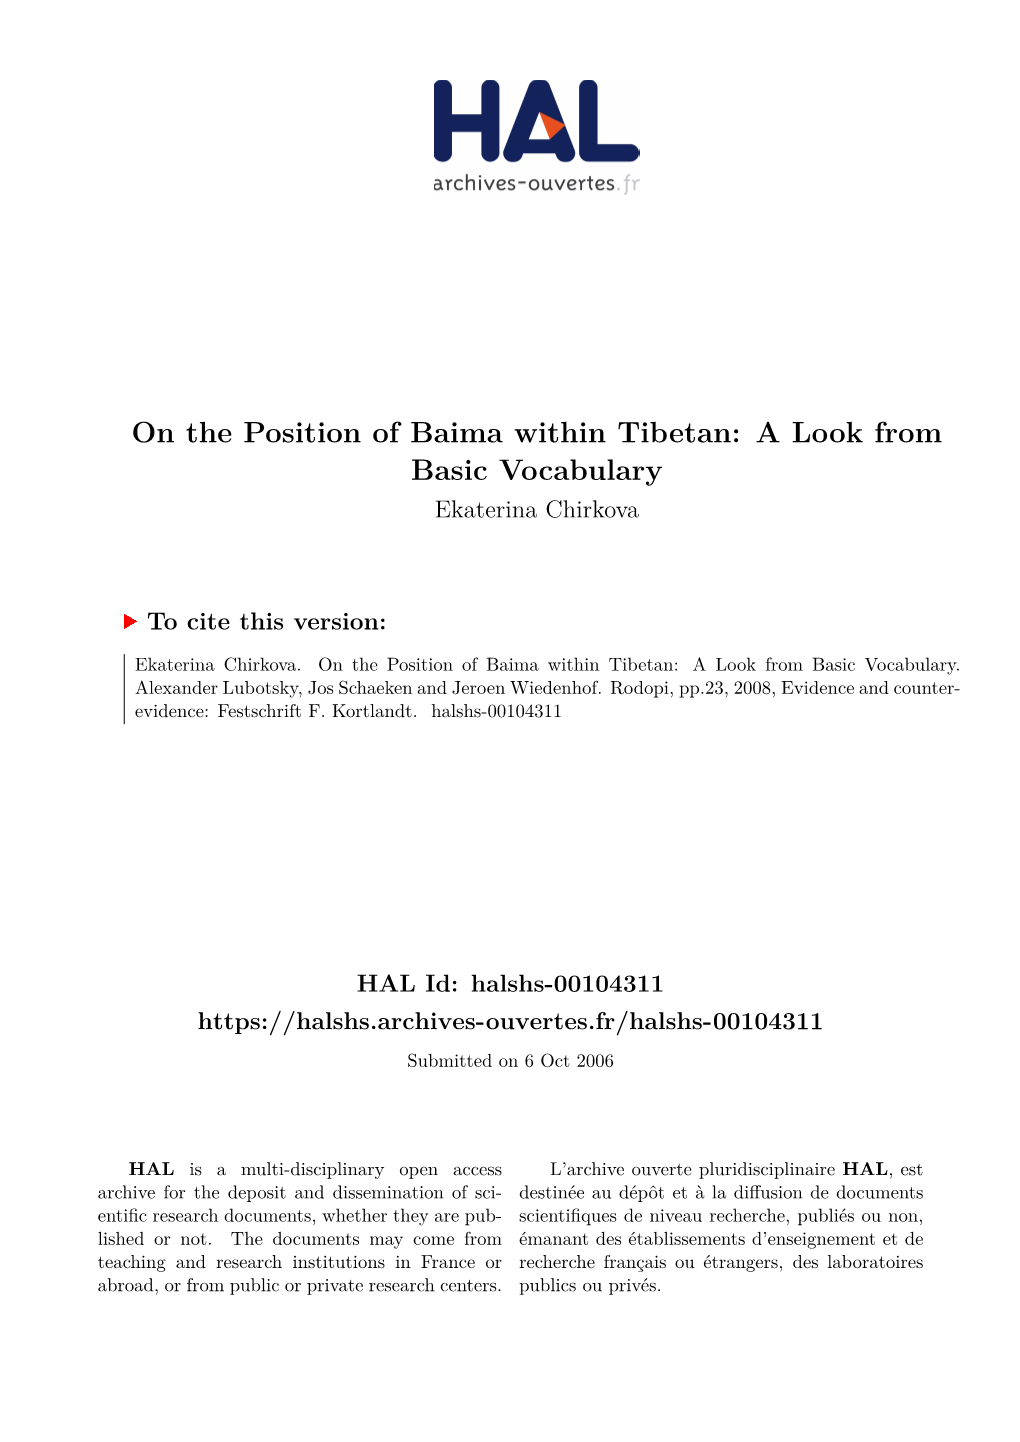 On the Position of Baima Within Tibetan: a Look from Basic Vocabulary Ekaterina Chirkova